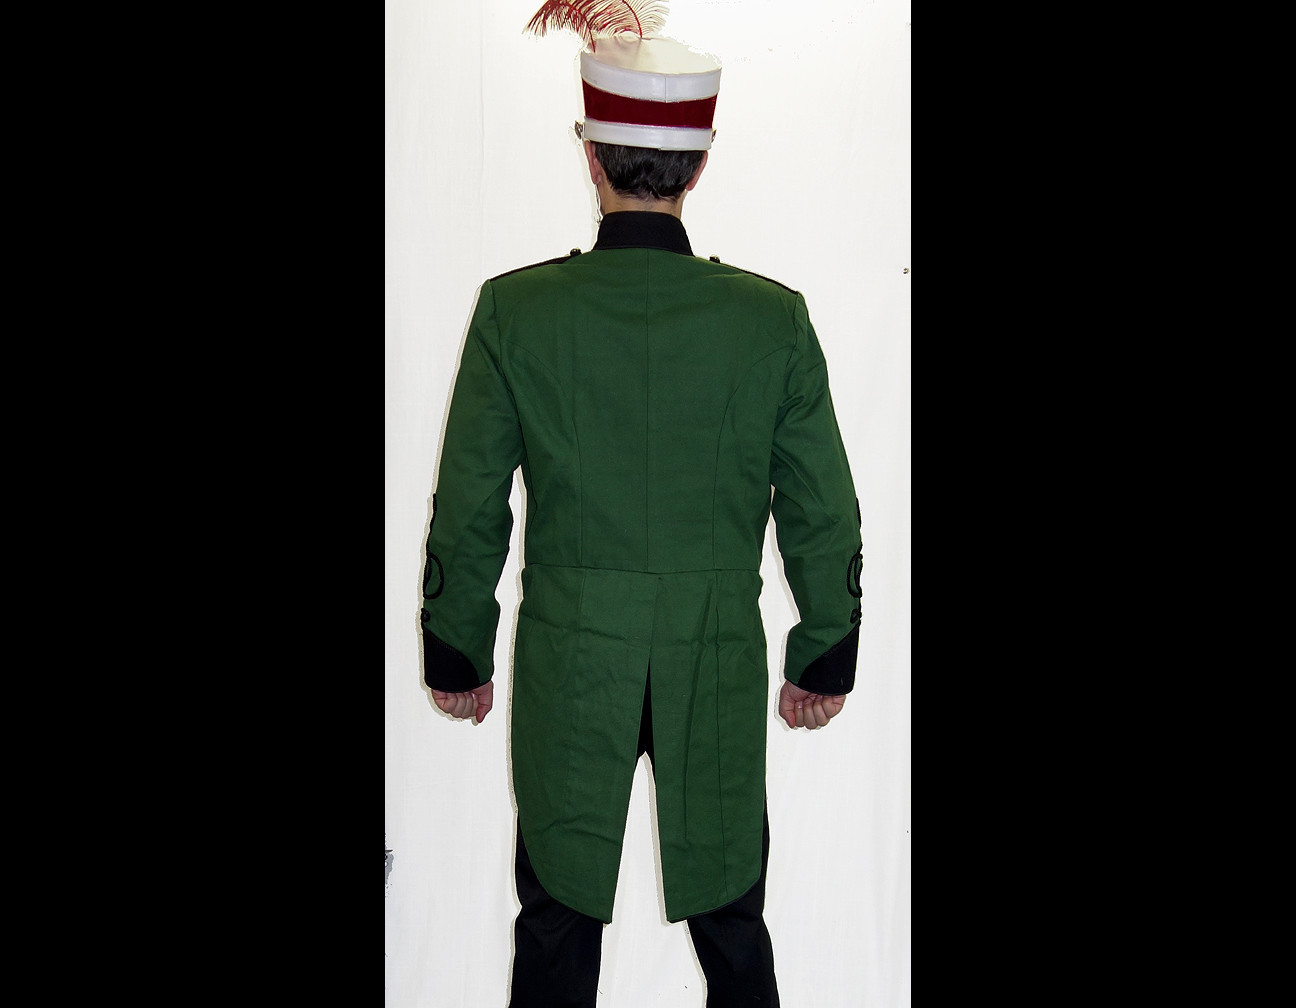 Vintage emerald green marching band jacket with tails in 2023